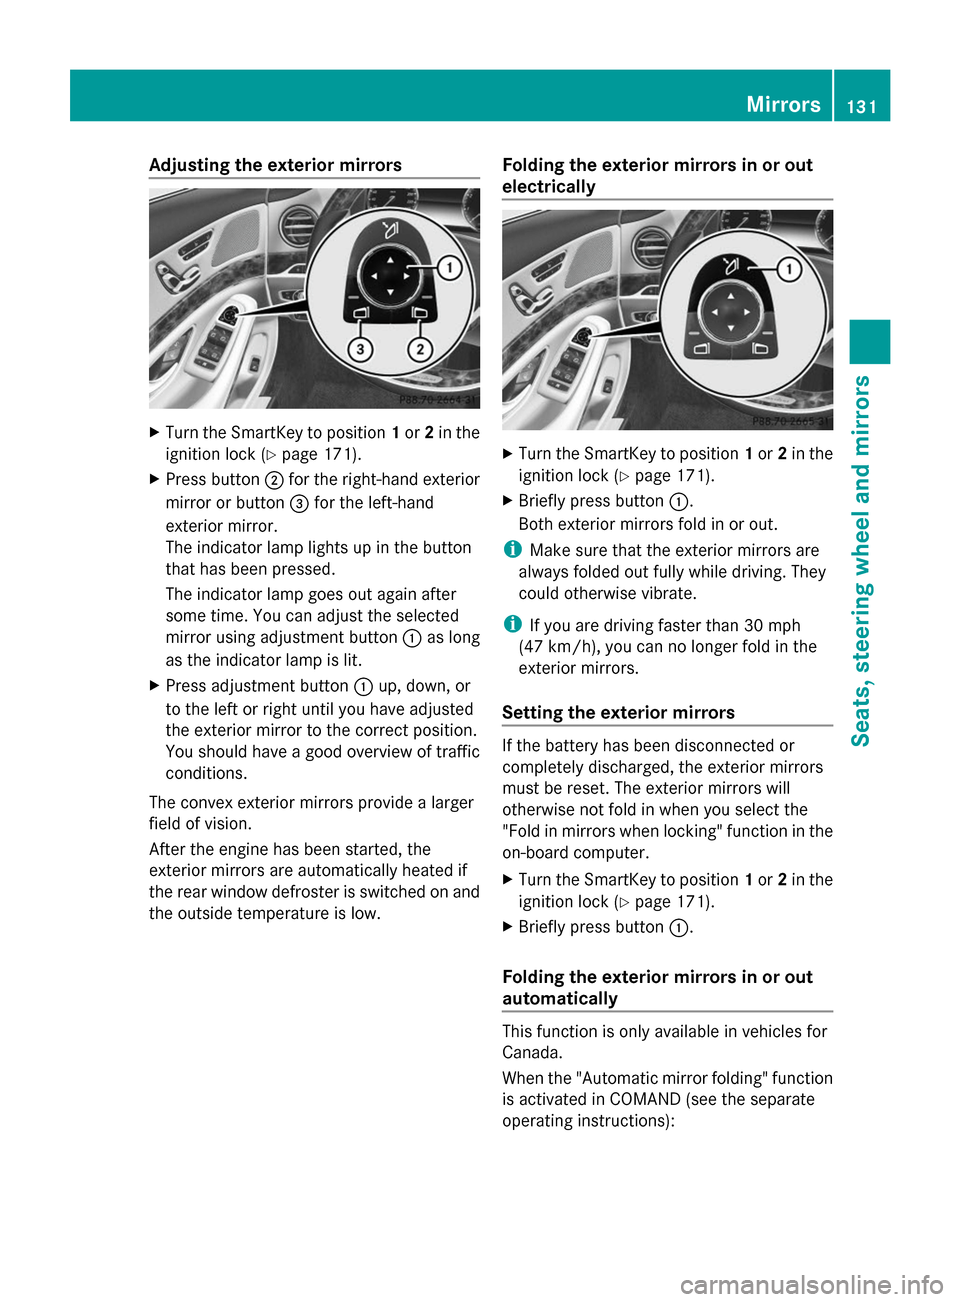 MERCEDES-BENZ S-Class 2014 W222 Owners Manual Adjusting the exterior mirrors
X
Turn the SmartKey to position 1or 2in the
ignition lock (Y page 171).
X Press button 0044for the right-hand exterior
mirror or button 0087for the left-hand
exterior mi